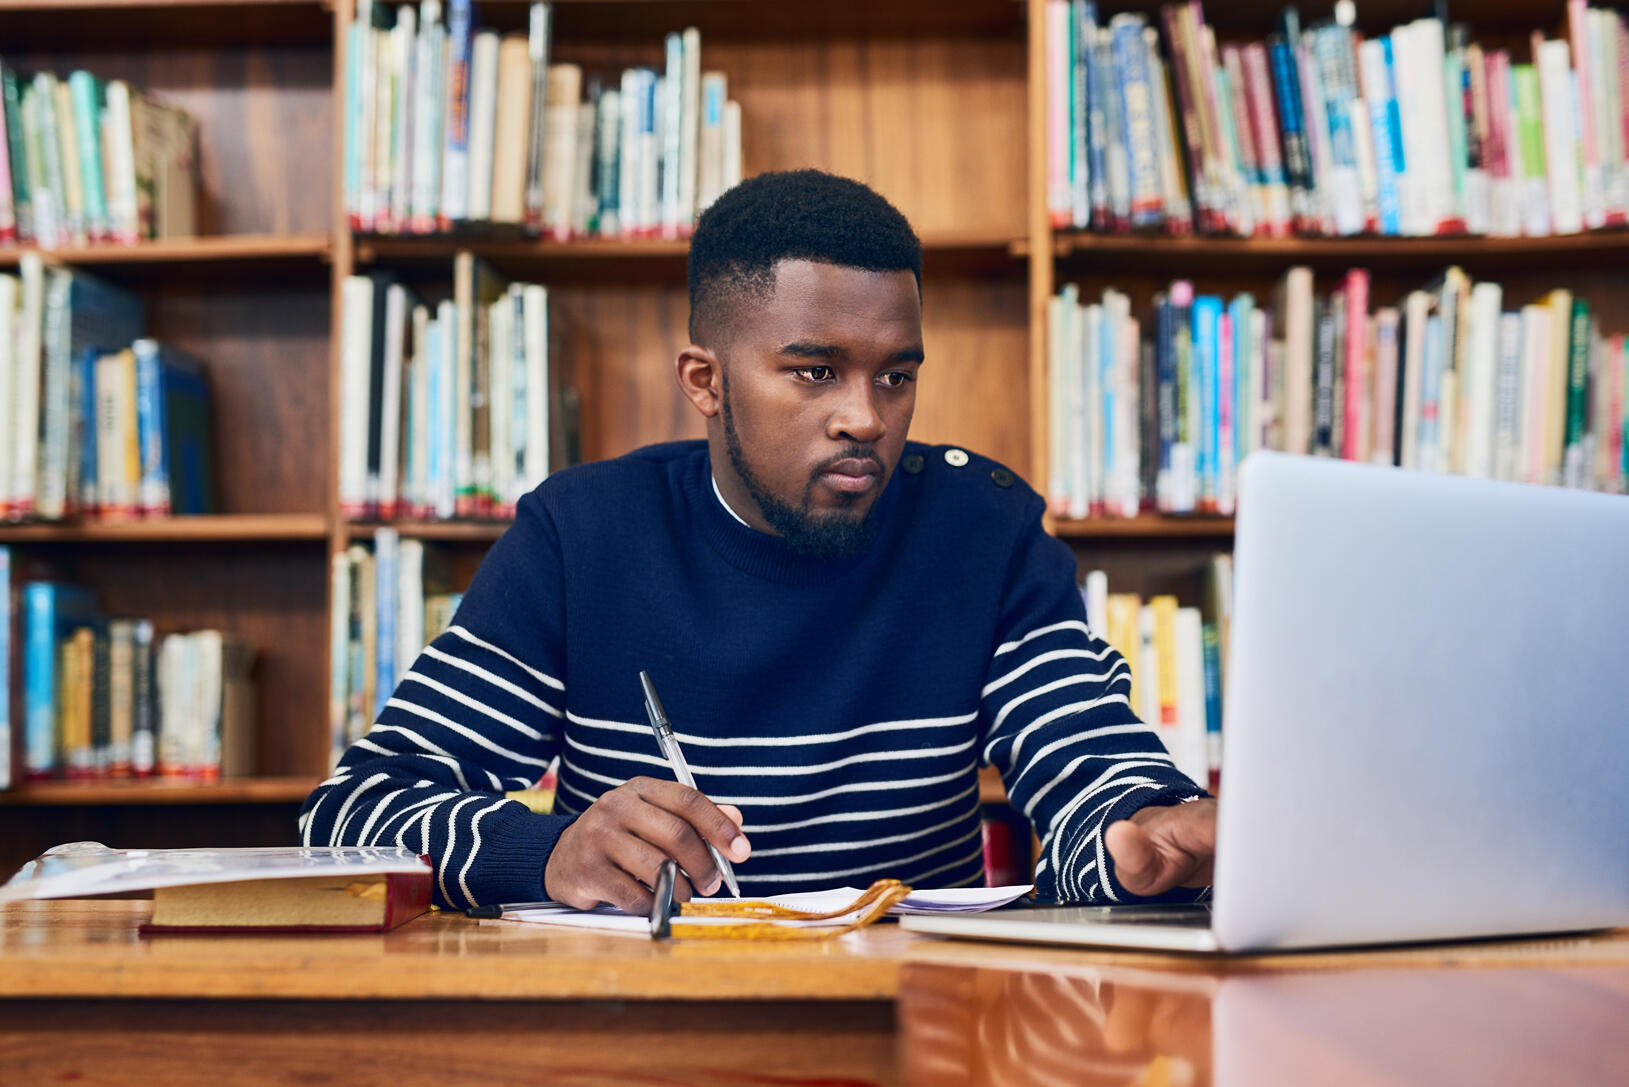 male student in blue and white striped sweater at computer, bookshelves behind